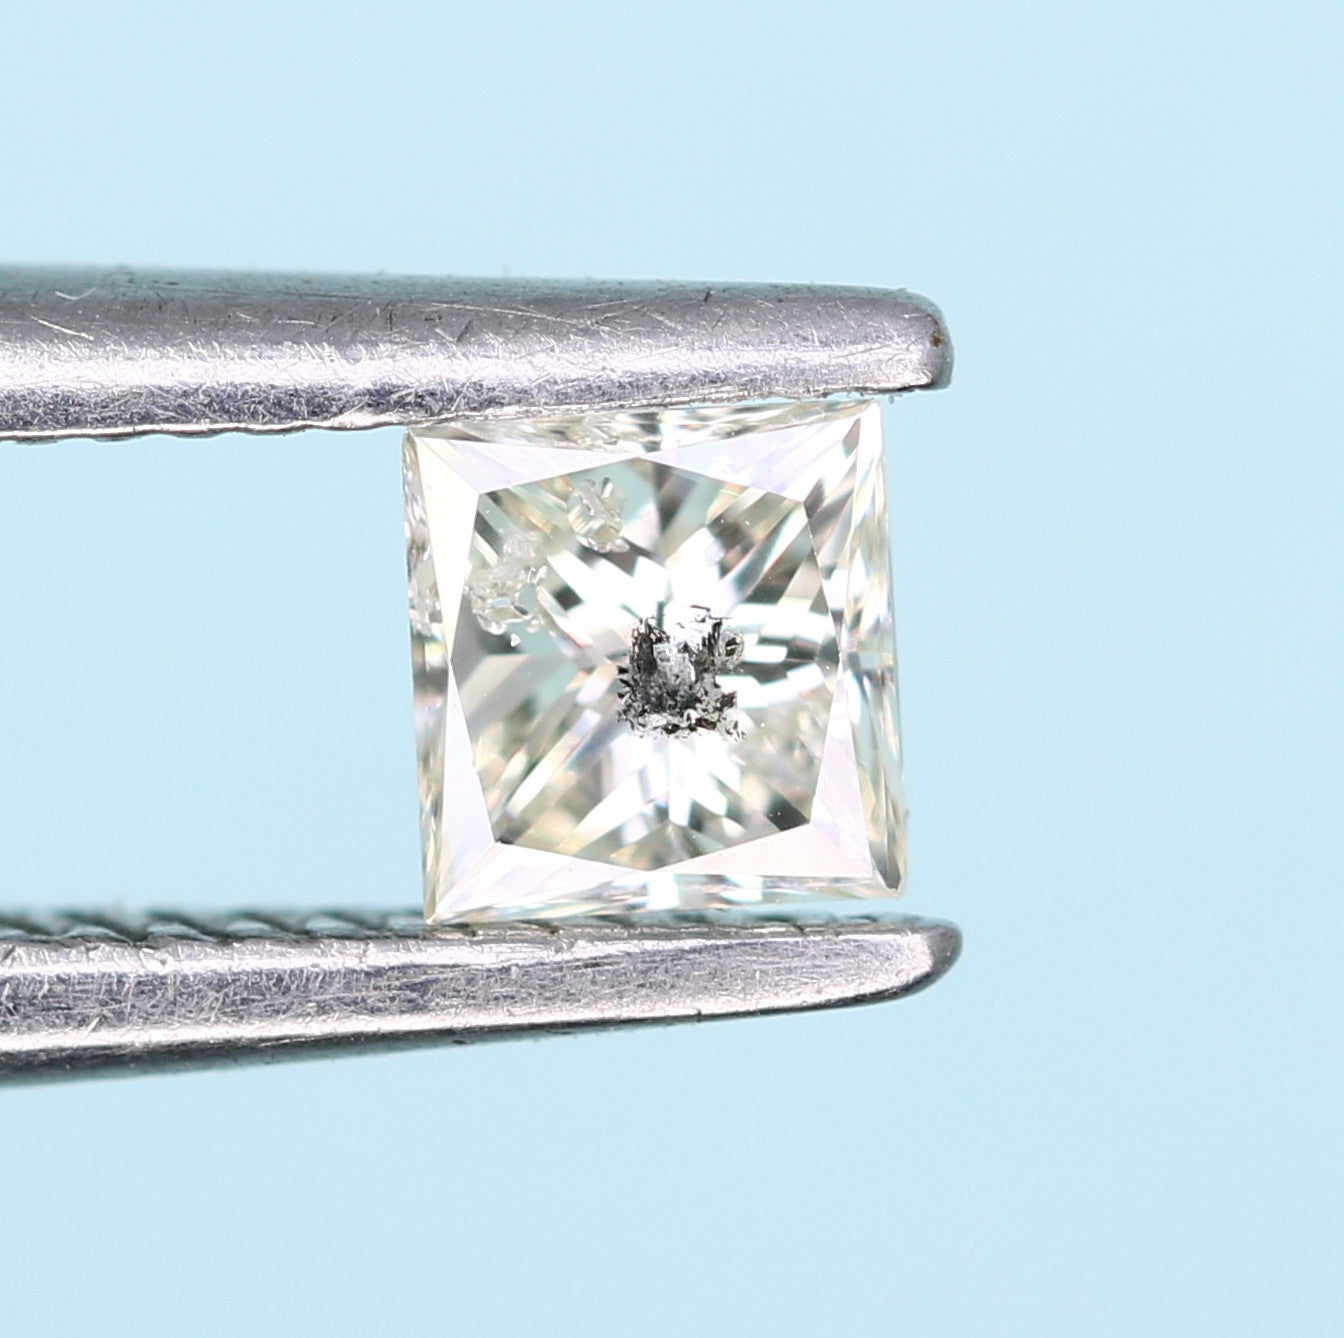 0.19 CT Princess Cut Salt And Pepper Diamond For Engagement Ring